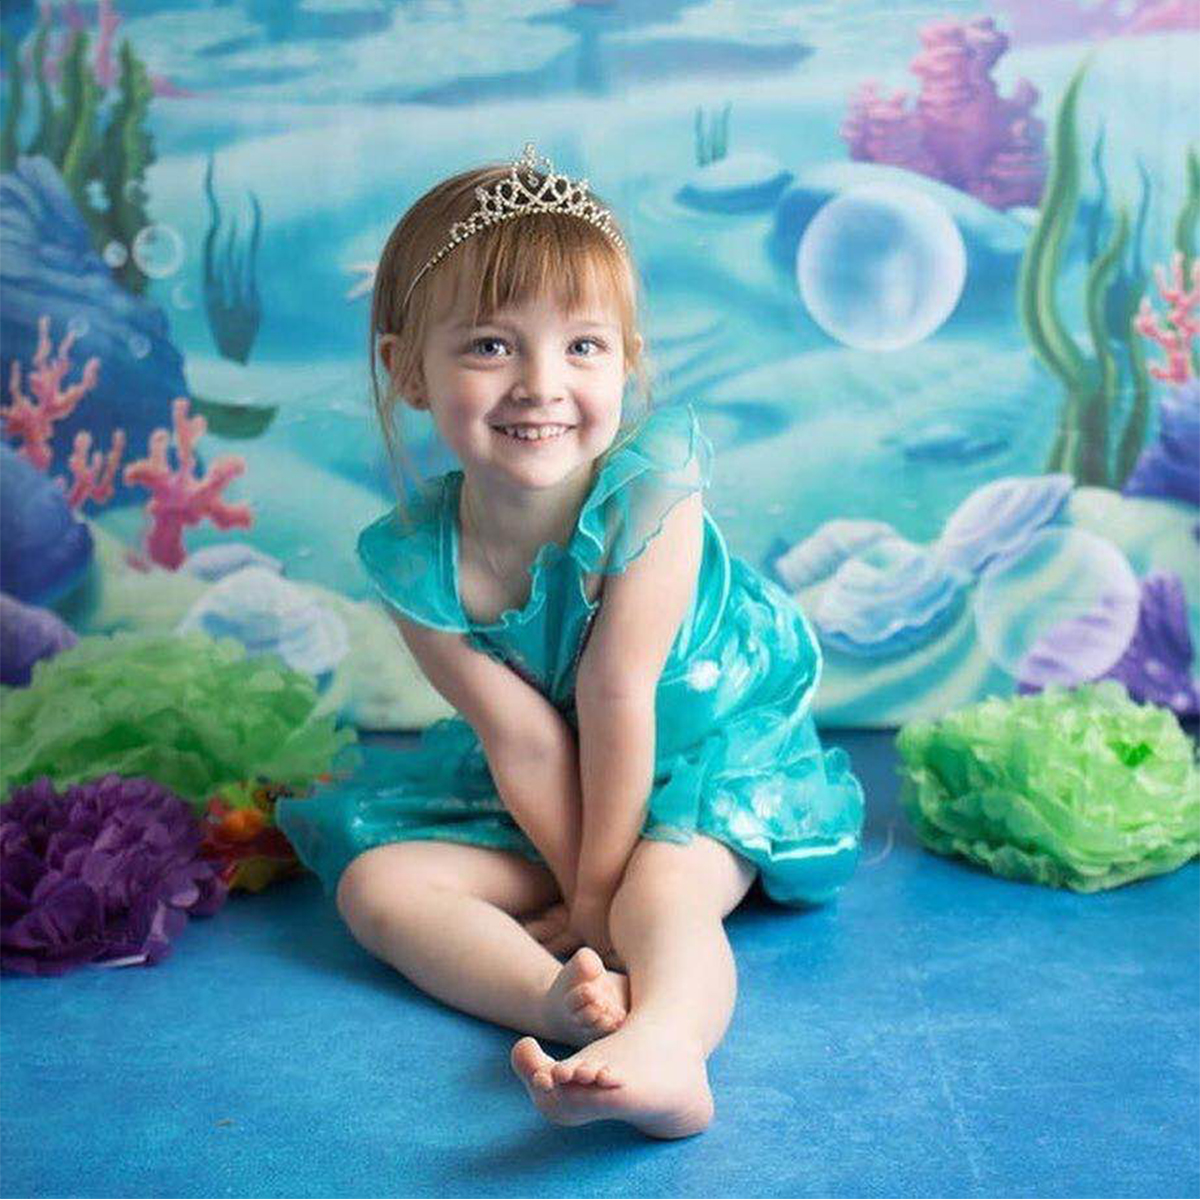 Find 220x150cm 150x100cm Under Sea Mermaid Castle Blue Sea Photography Background Cartoon Backdrop Kids Baby Party Decor Props for Sale on Gipsybee.com with cryptocurrencies